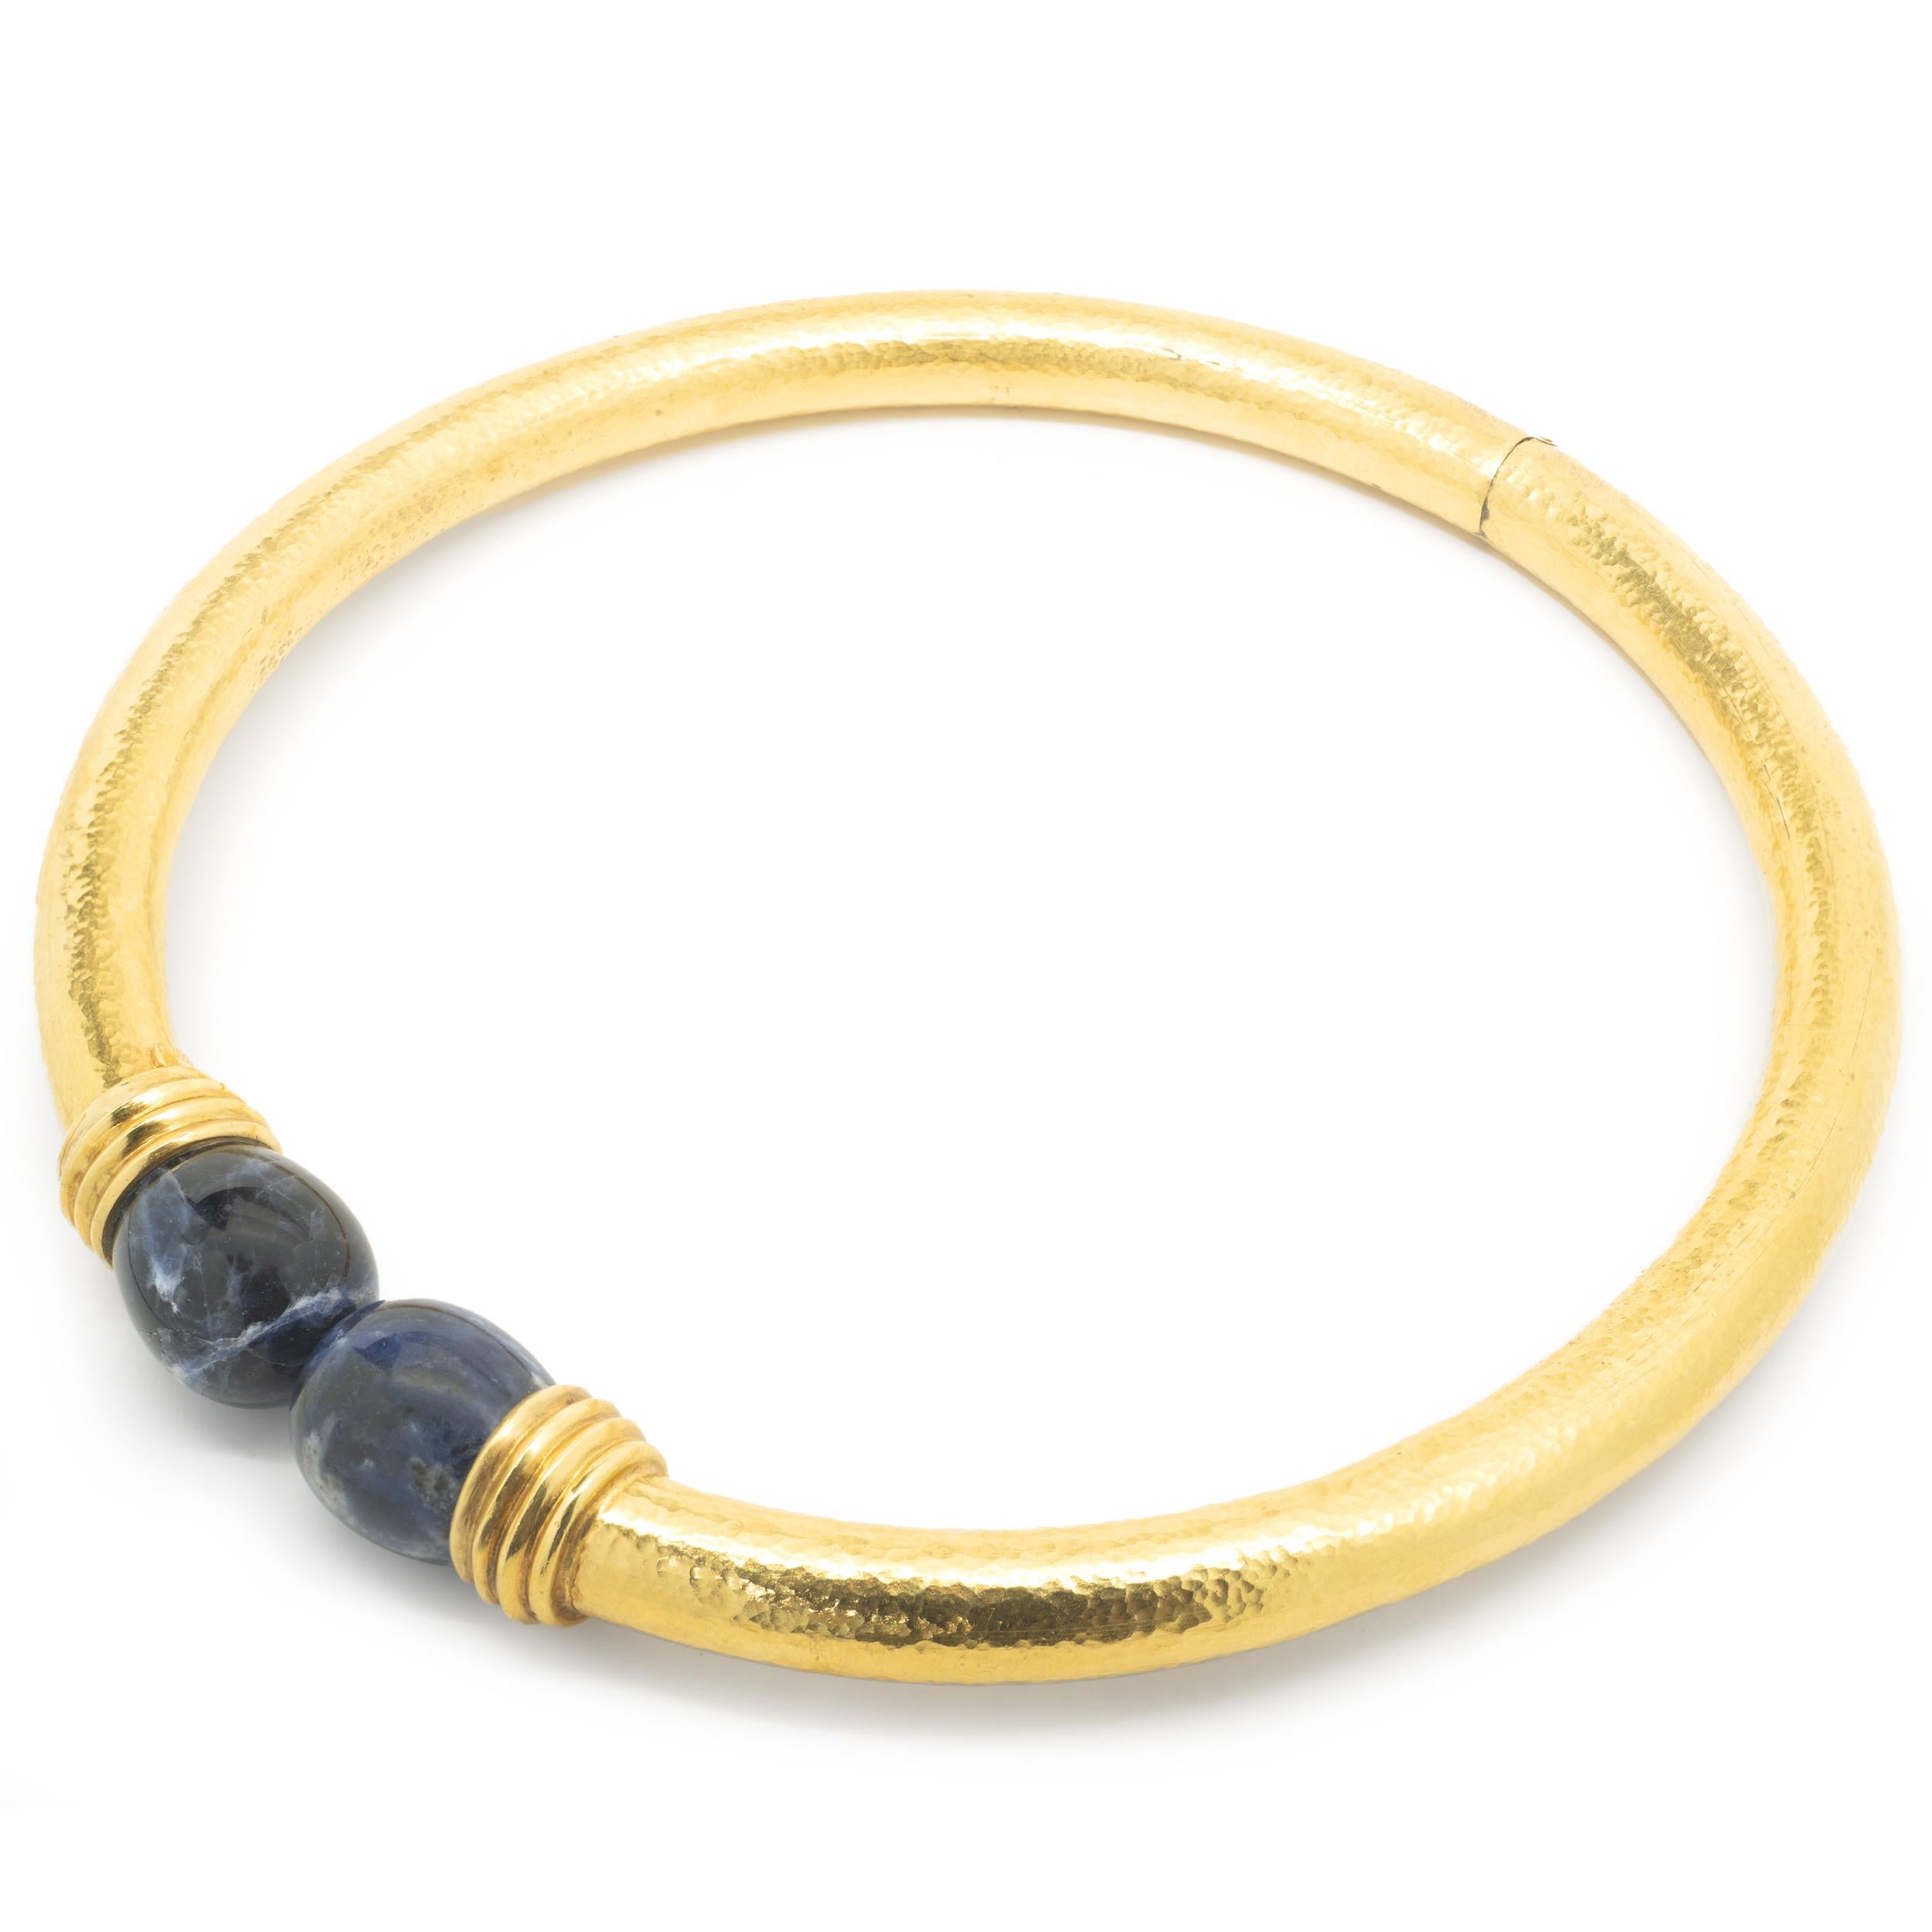 Designer: Ilias LaLaounis
Material: 18K yellow gold
Weight: 118.58 grams
Measurements: collar measures 16-inches long
